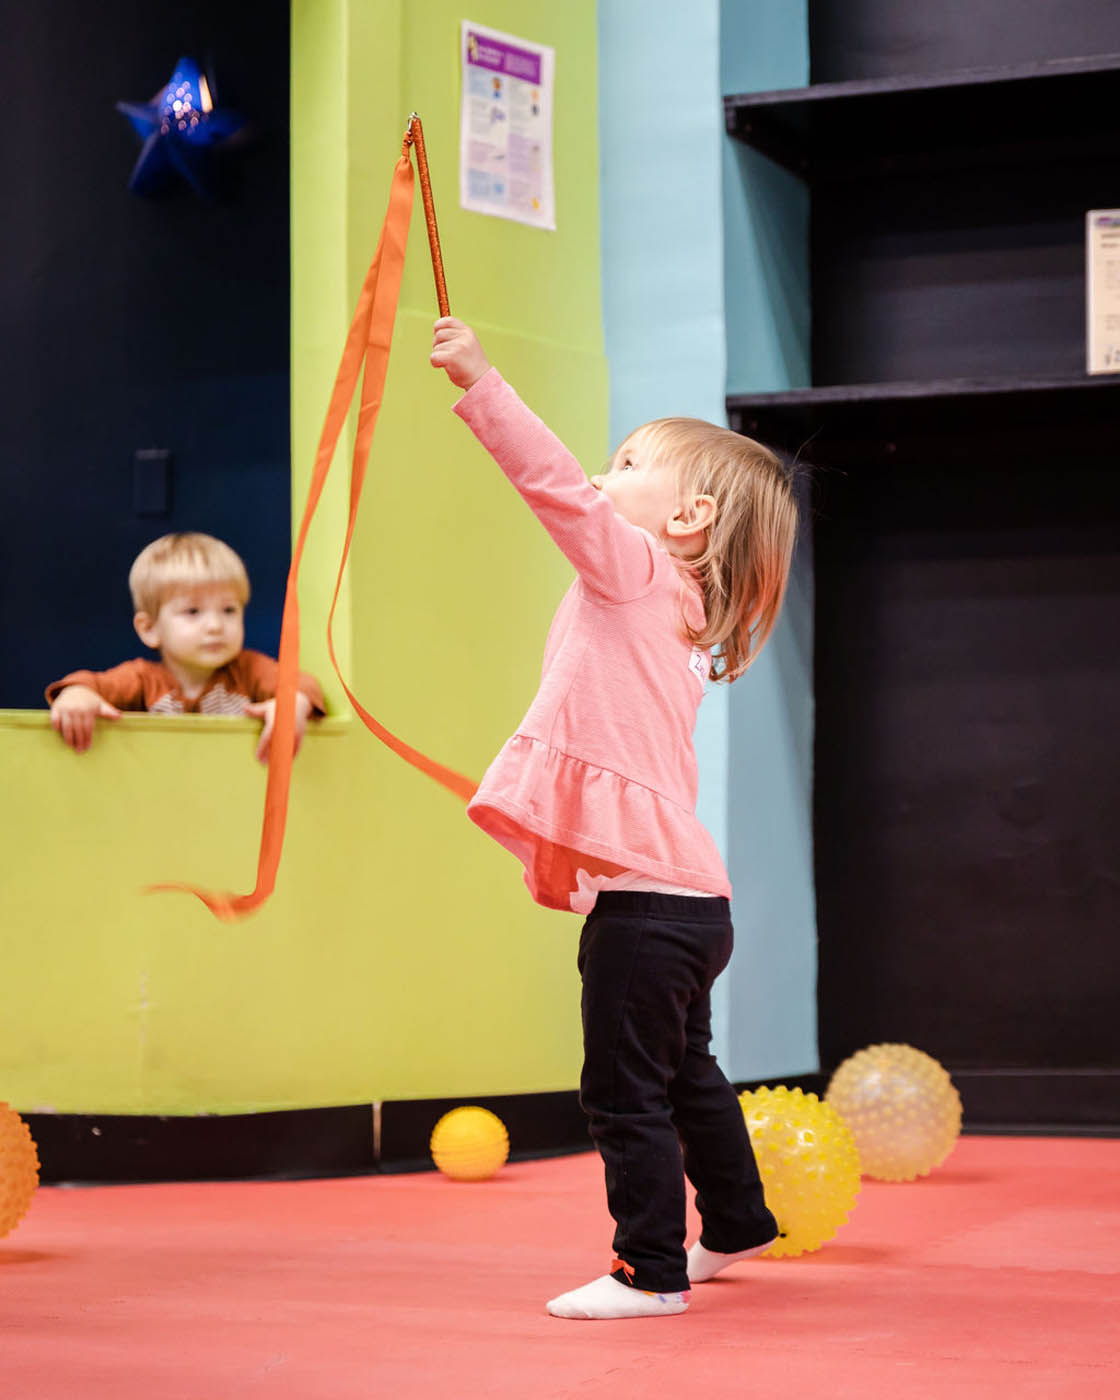 A little girl playing with ribbons and increasing her motor skills in sports classes with Romp n' Roll.